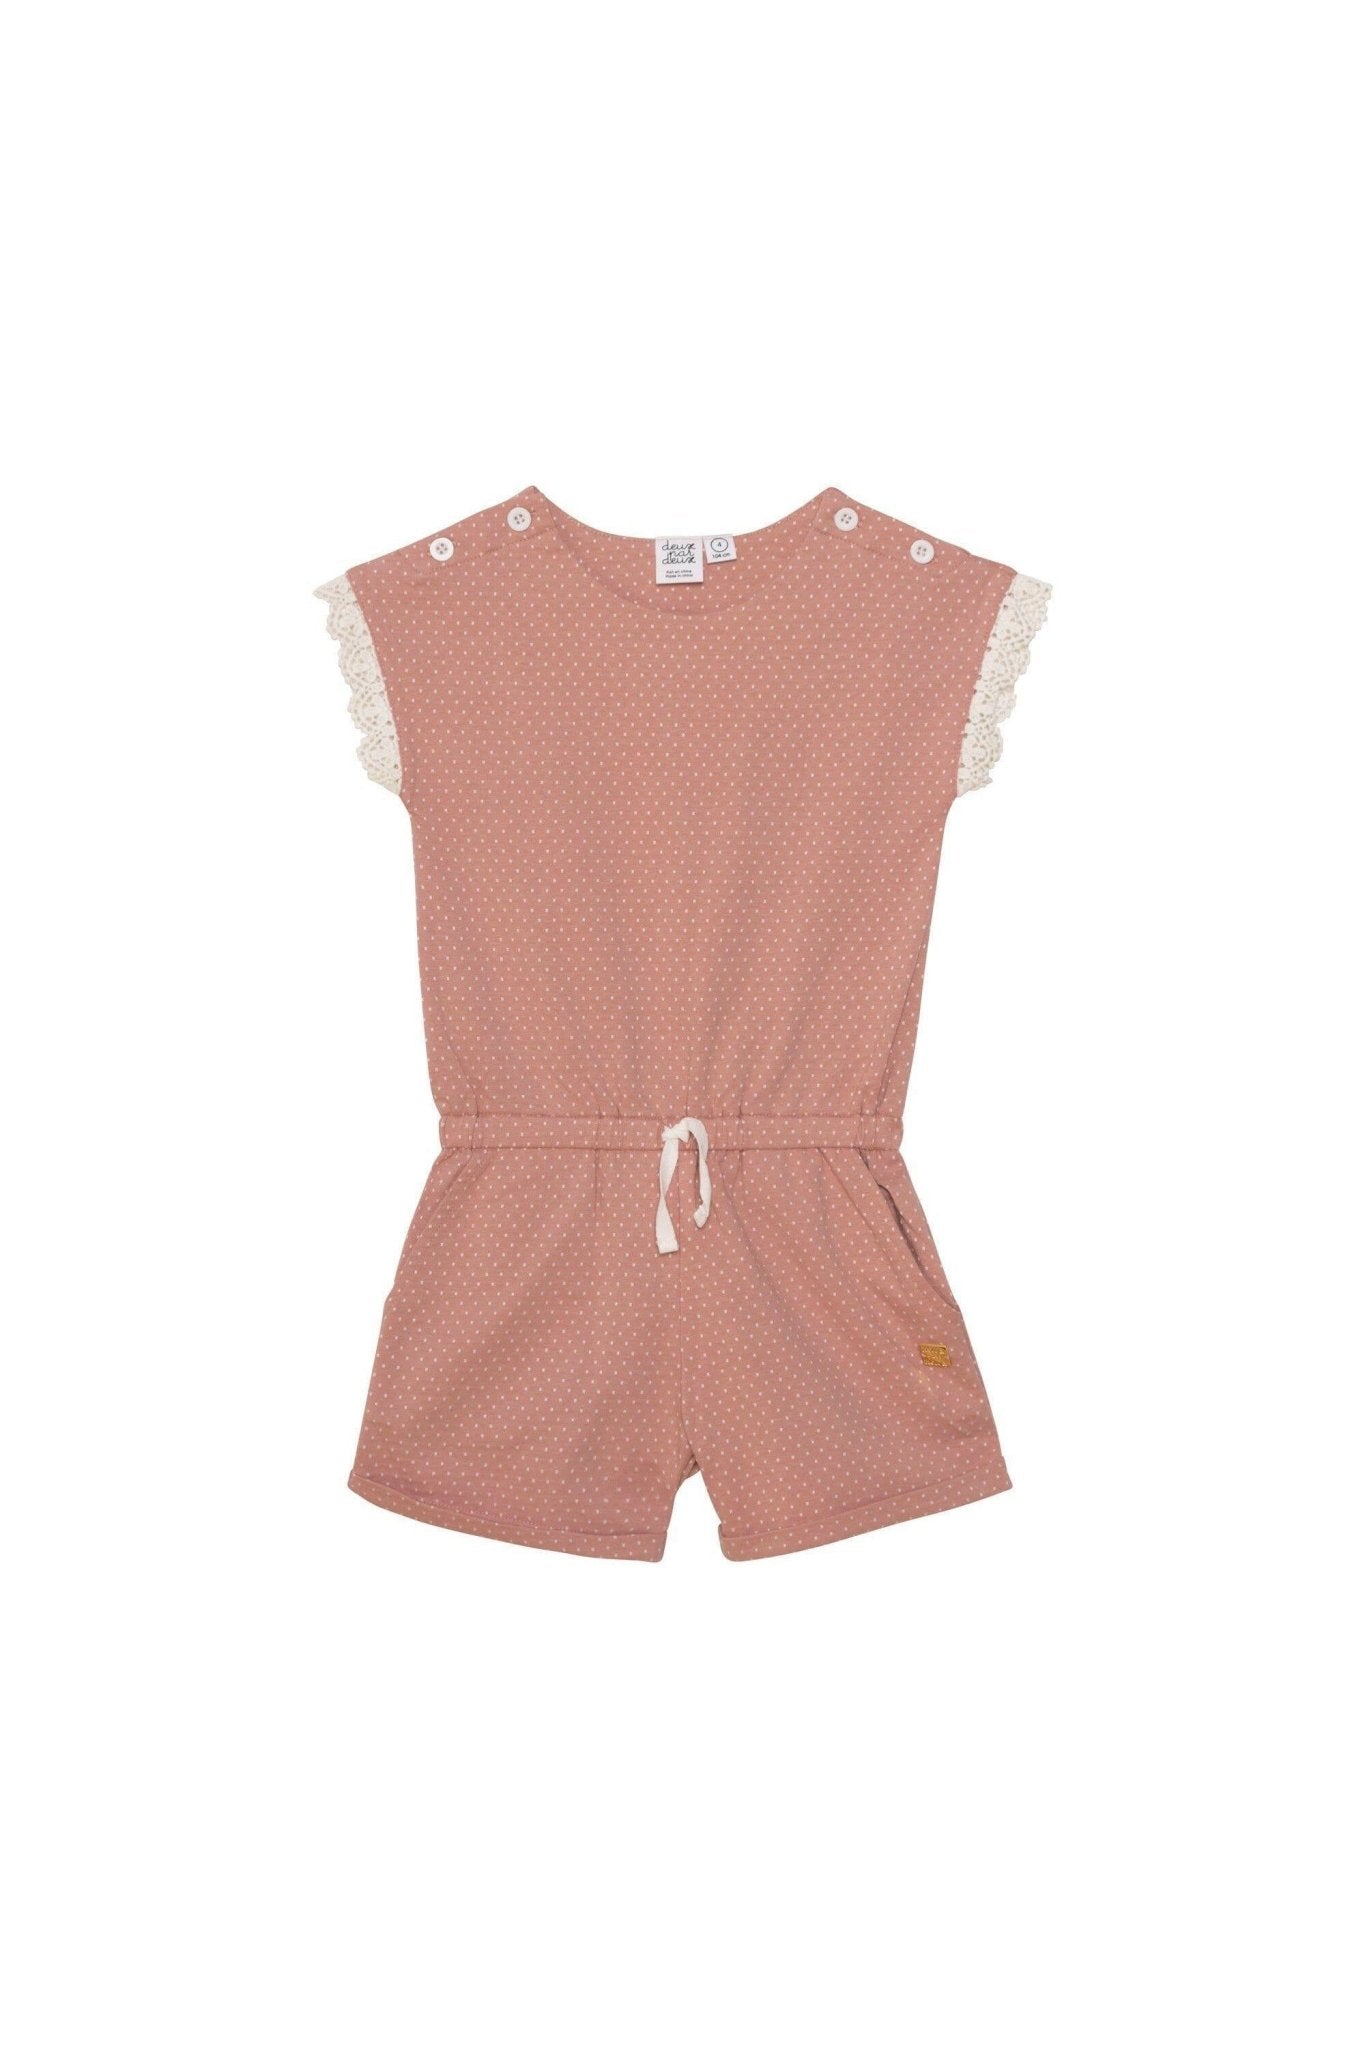 Printed Jumpsuit With Lace Dusty Pink Polka Dots - Mack & Harvie